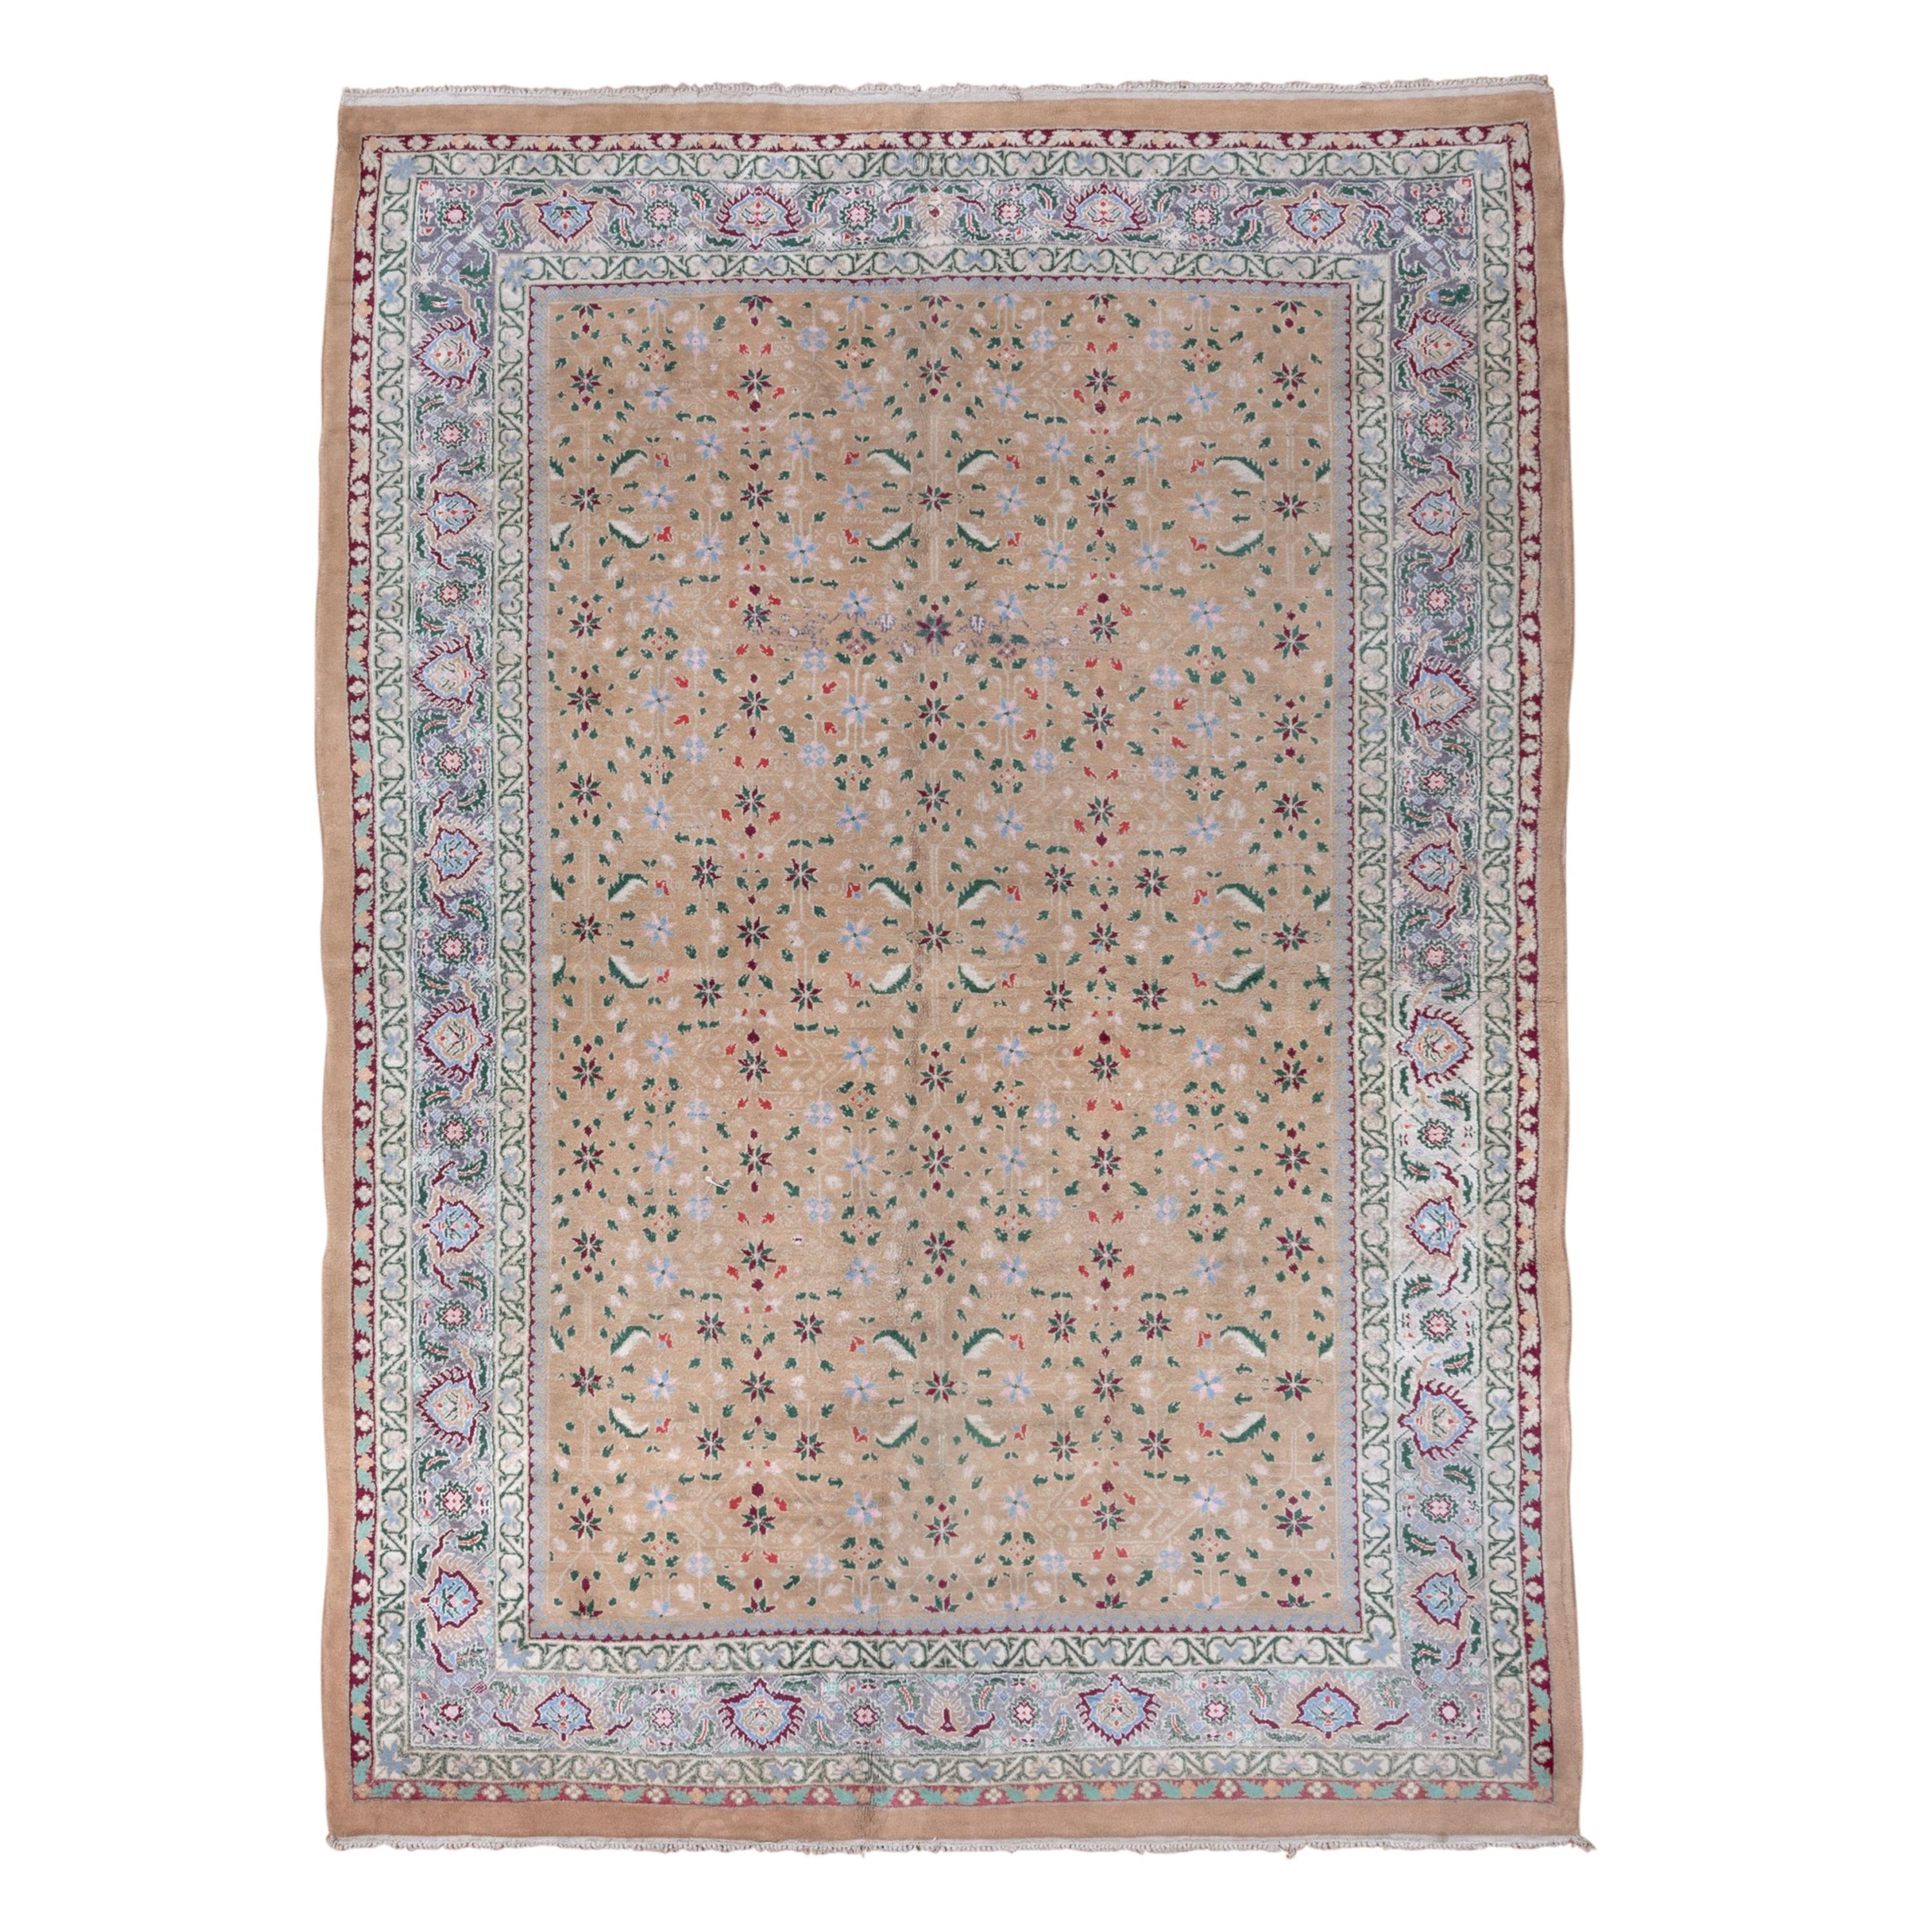 Authentic Indian Agra Carpet, Full Pile, Beige Field, Gorgeous Border